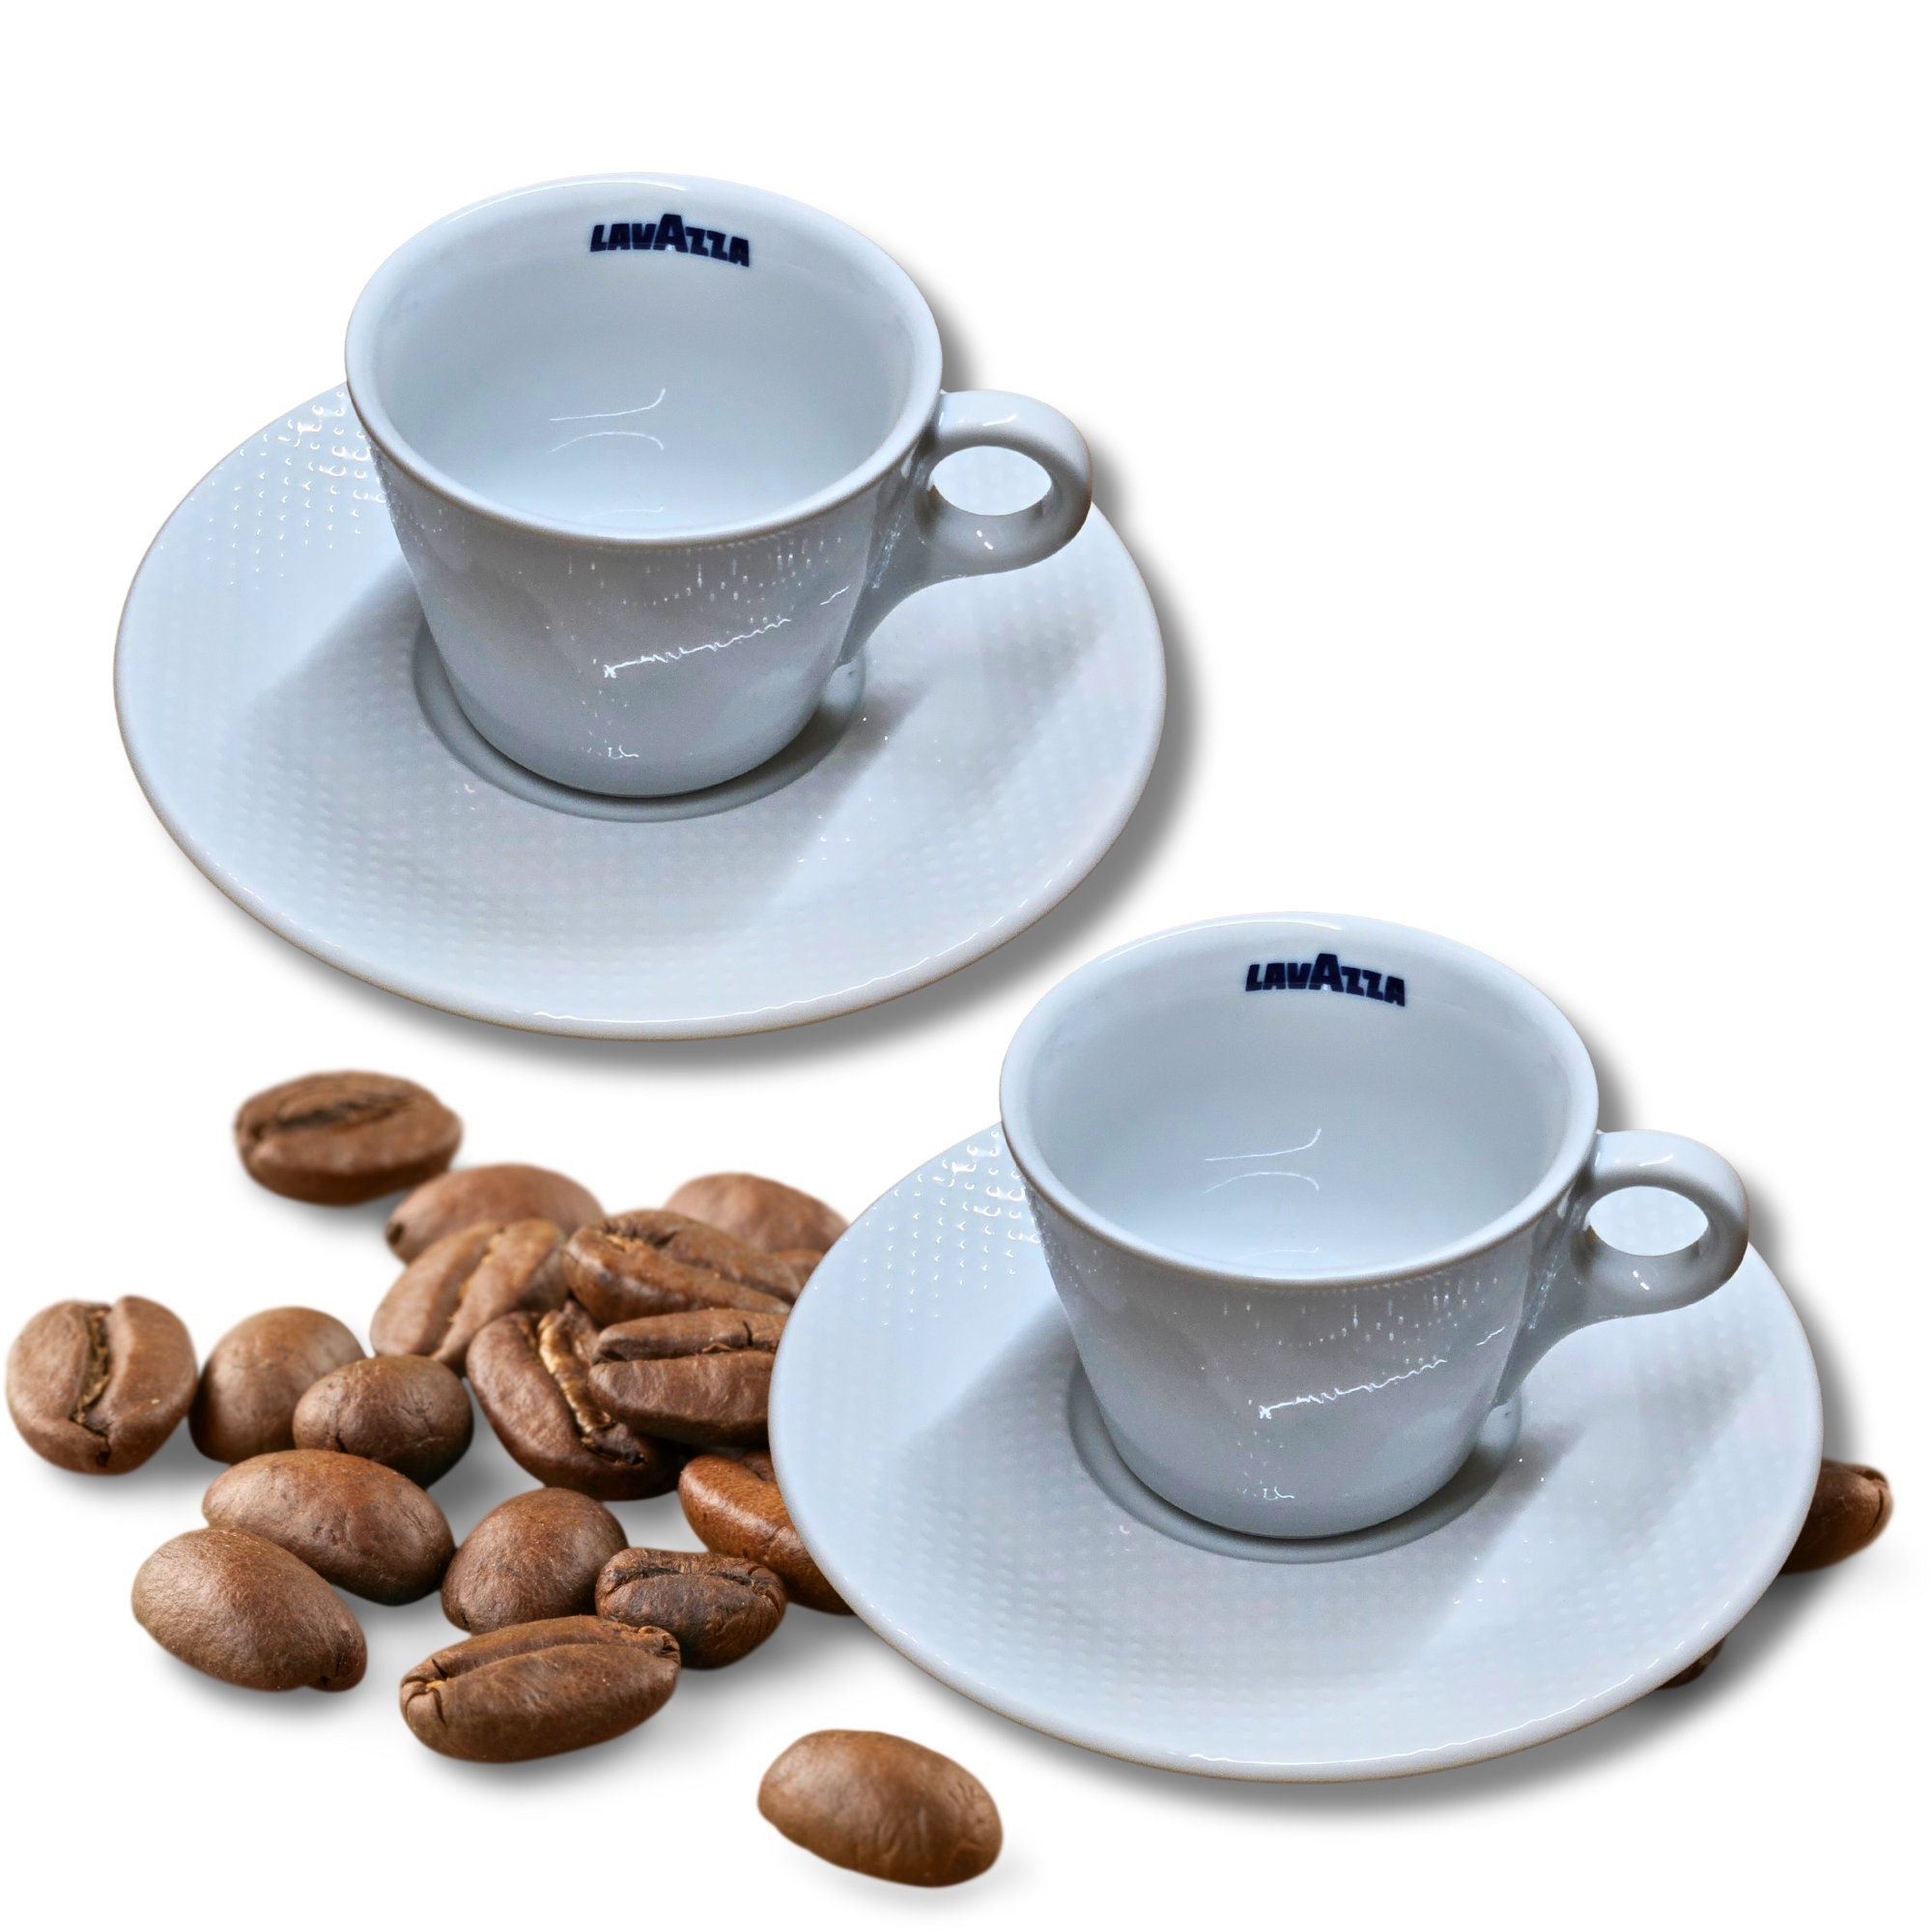 Lavazza Classic Collection Espresso Cup and Saucer (Set of 12